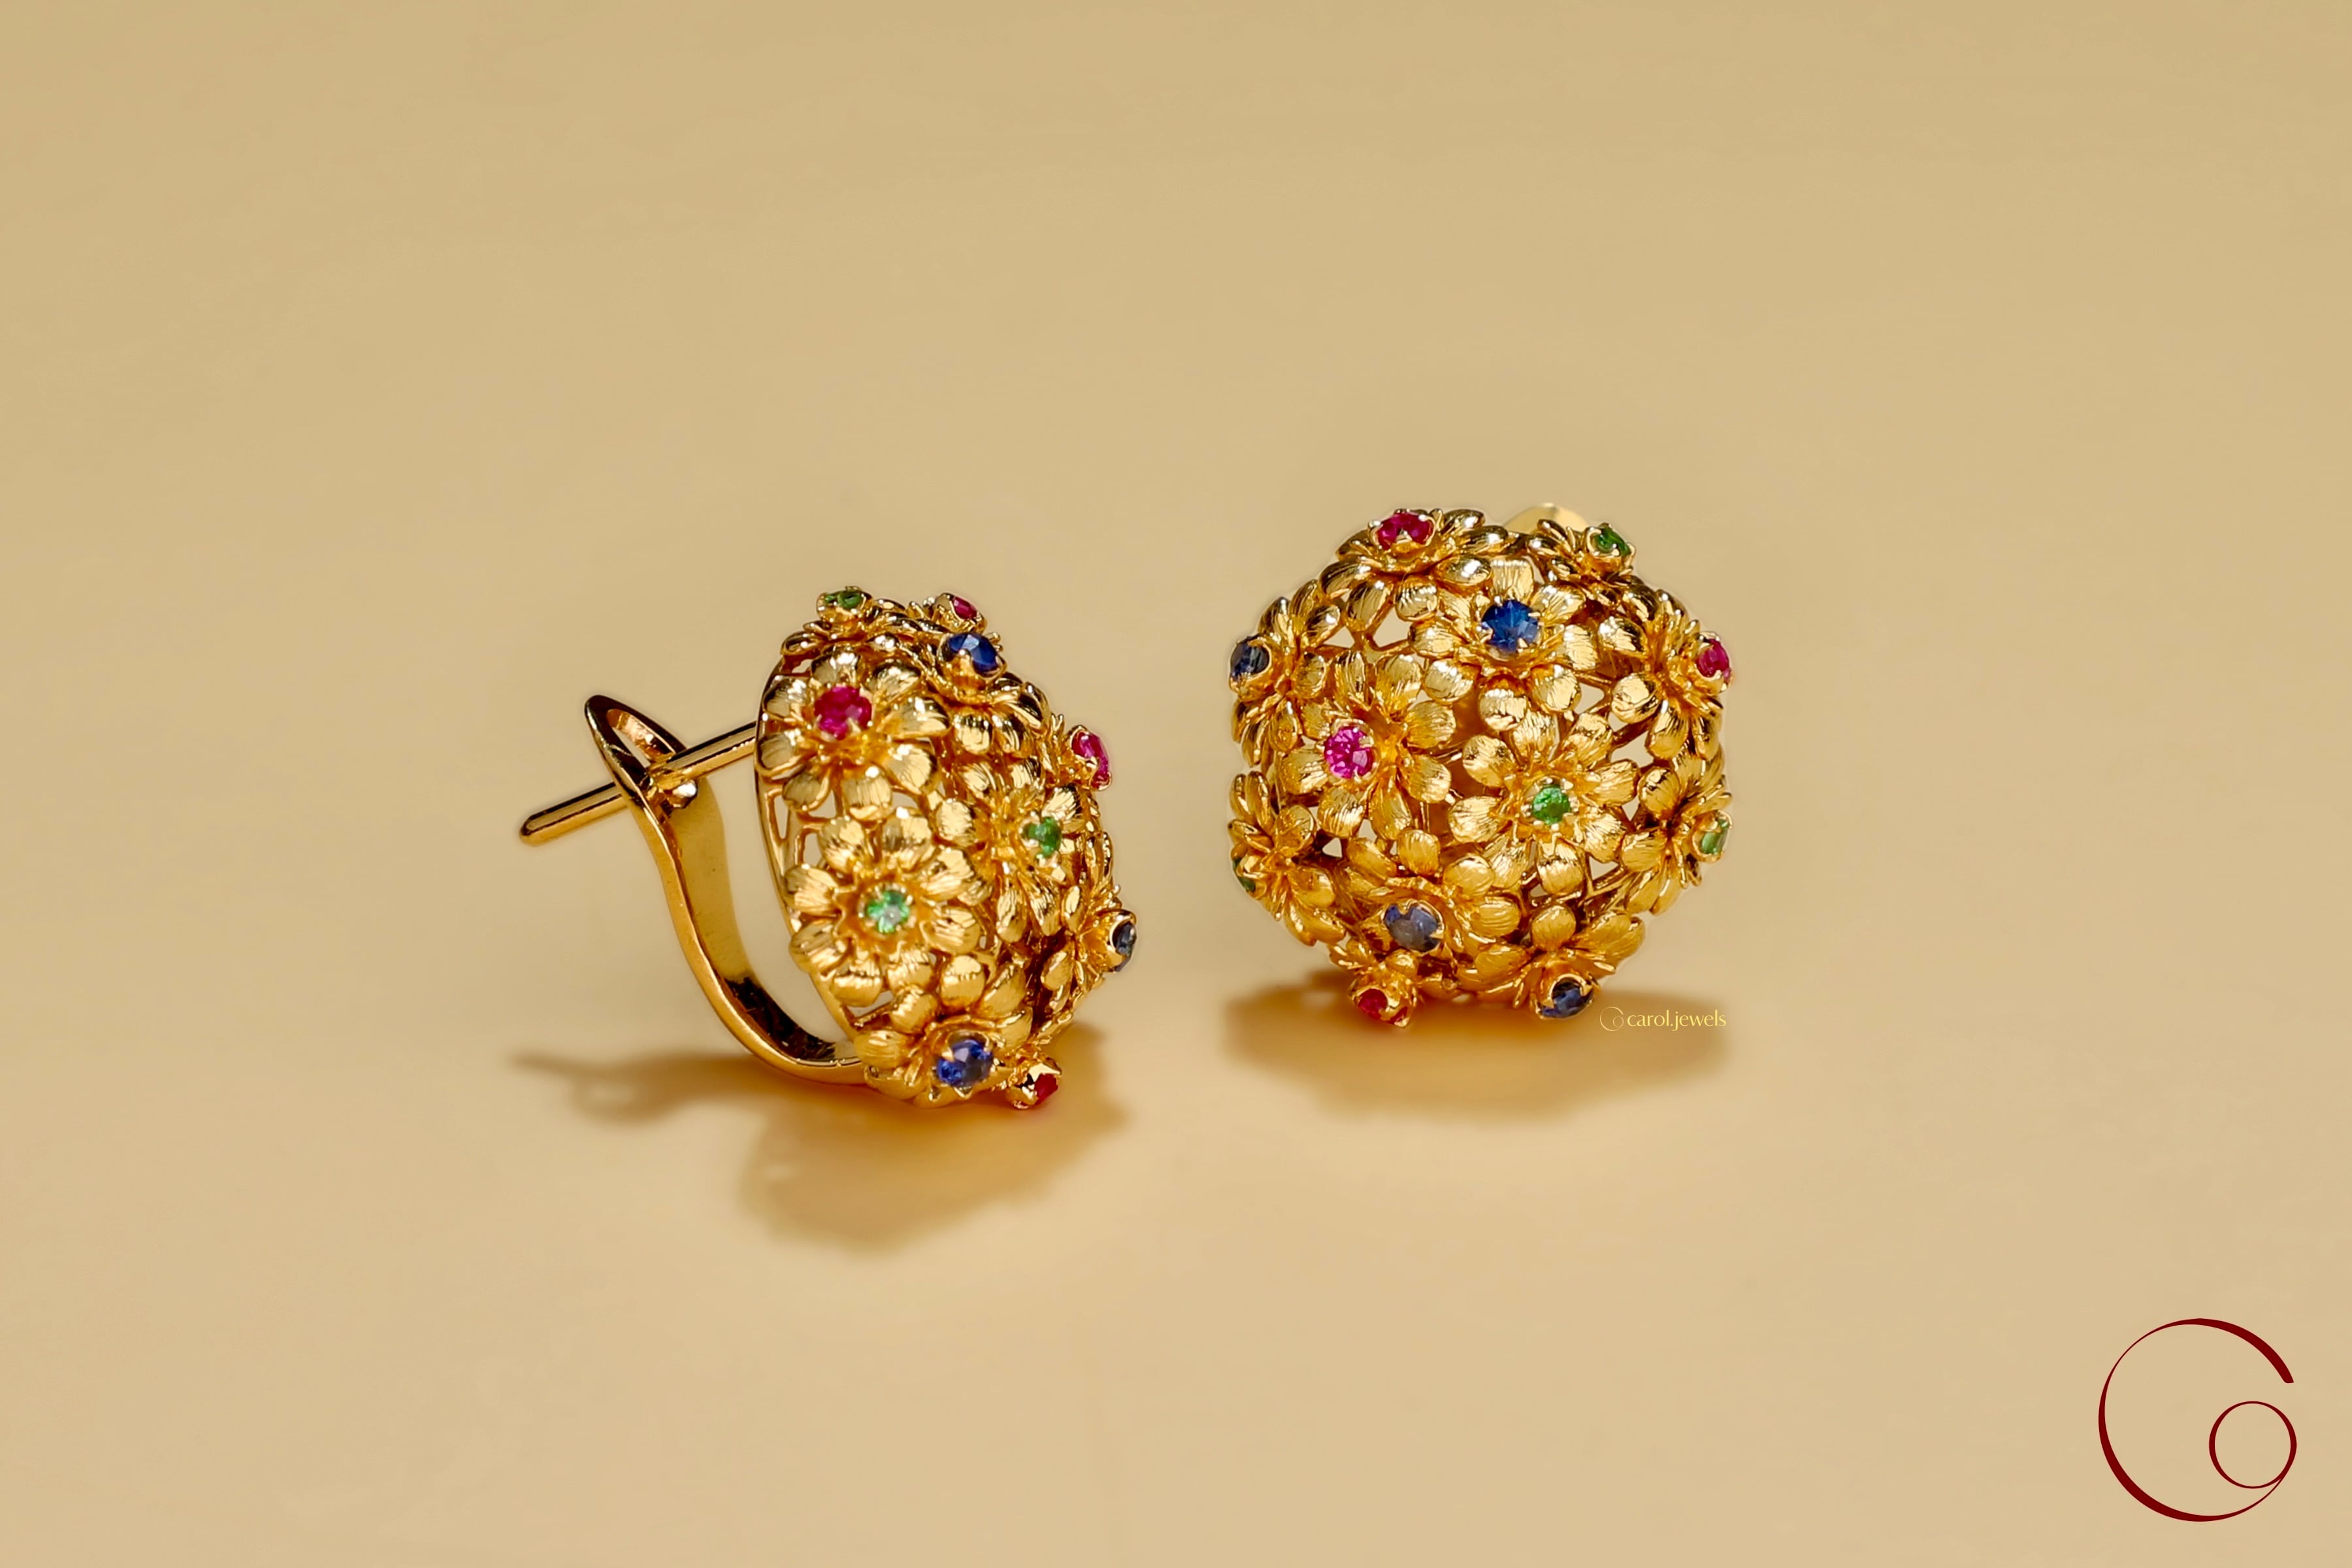 Small flowers with ruby, sapphires, tsavorites in the center, bundled together into a pair of fine jewelry earring